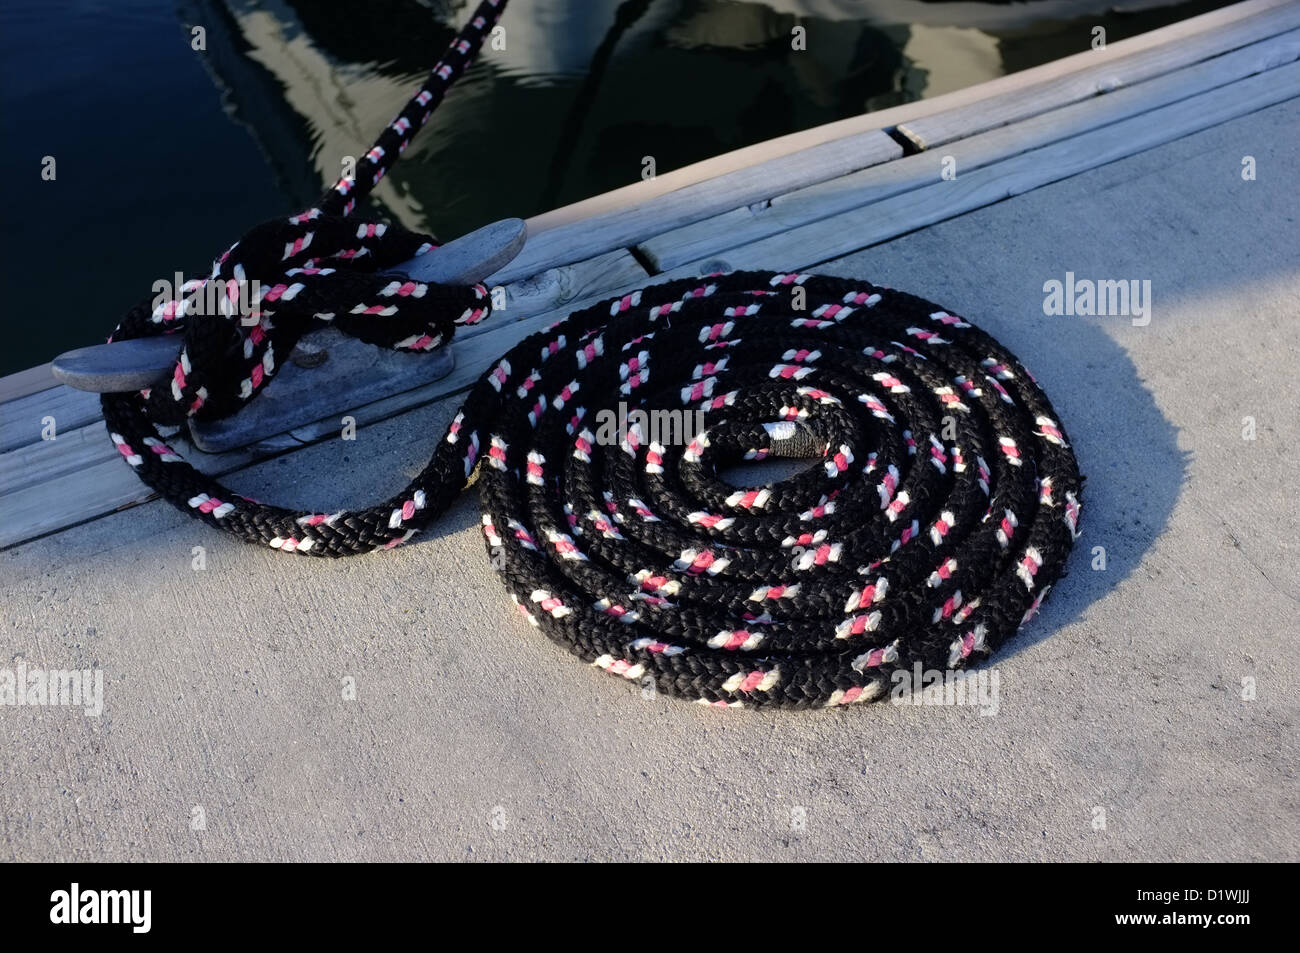 A black, pink and white boat mooring line coiled on the finger birth at the Royal Phuket Marina Thailand Stock Photo